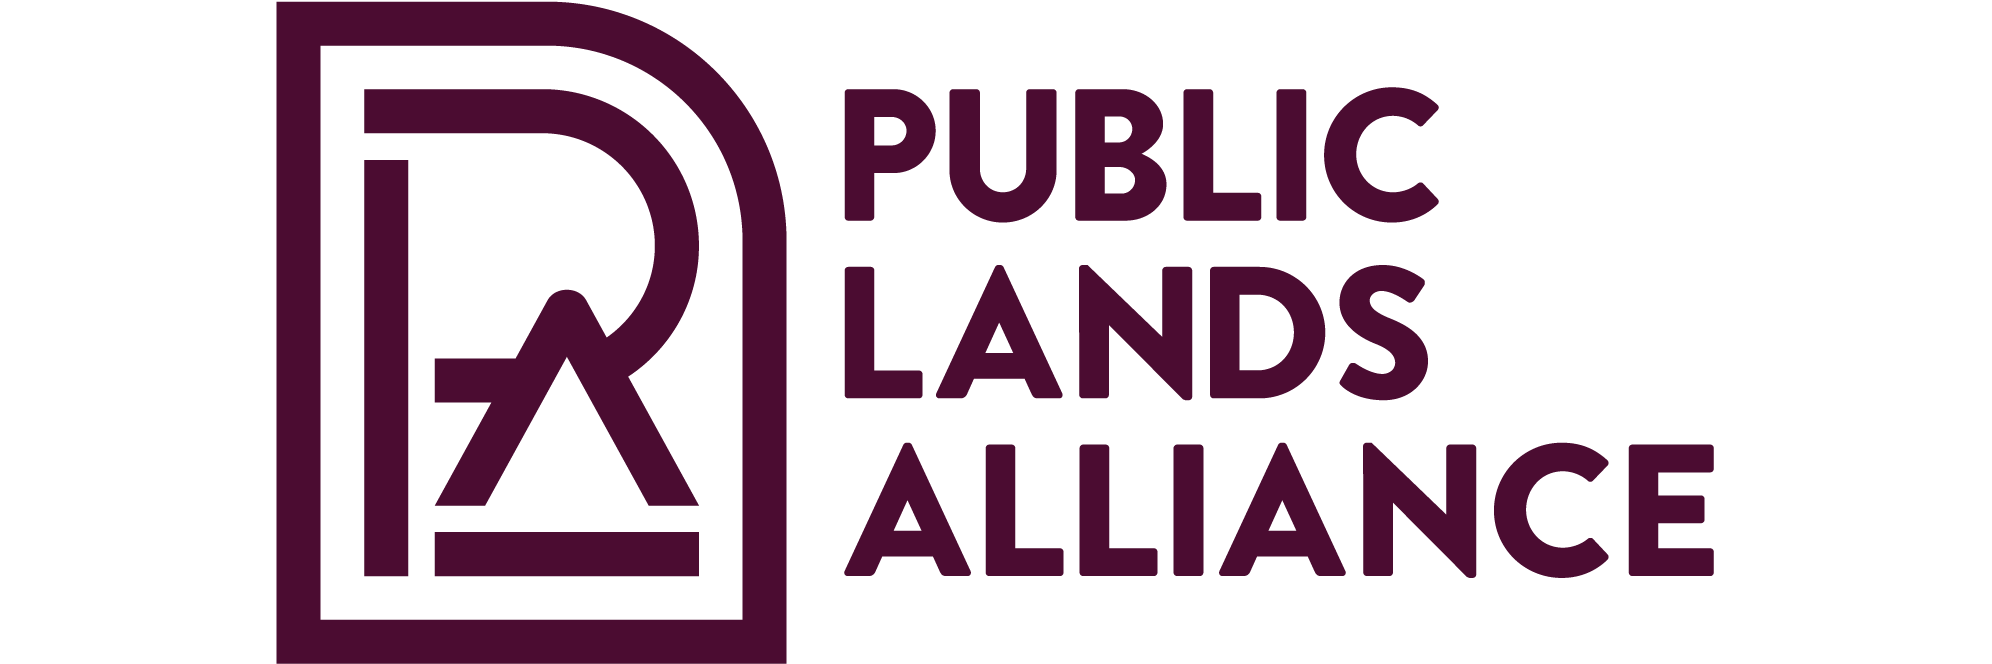 Public Lands Alliance Convention and Trade Show